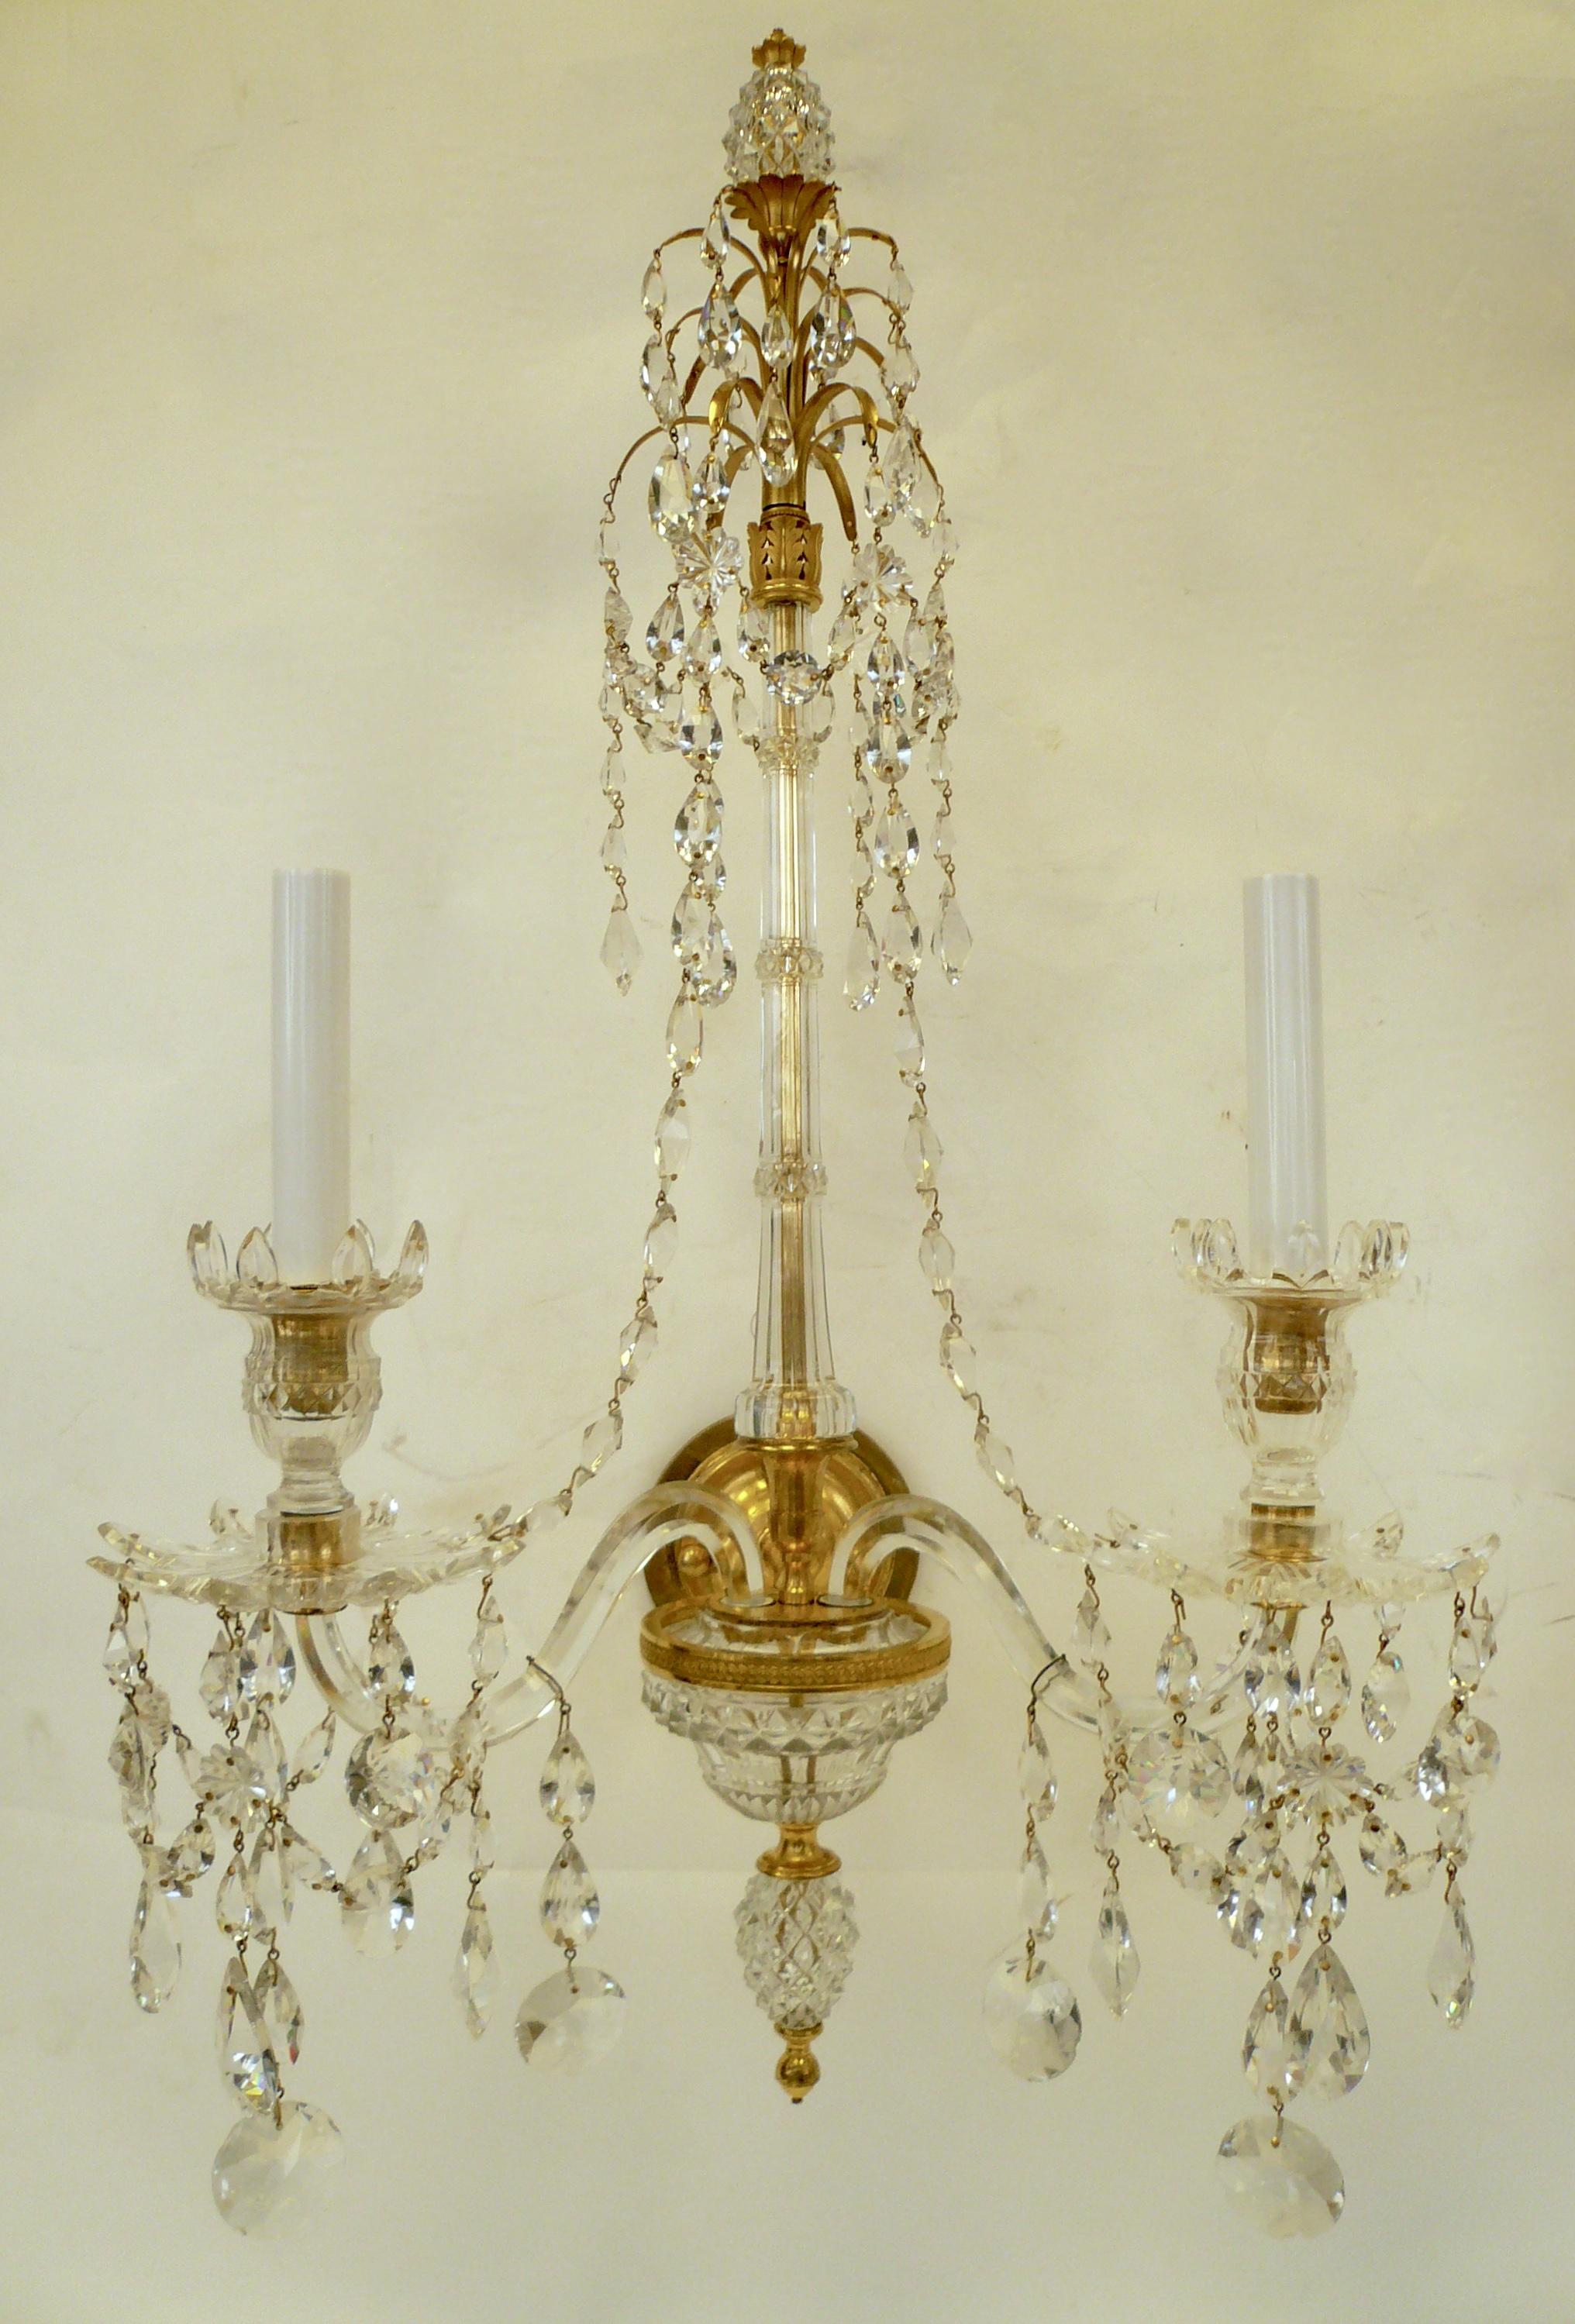 Gilt Exquisite Pair of Georgian Sconces in the Adam Style, Attributed to Wm. Parker For Sale